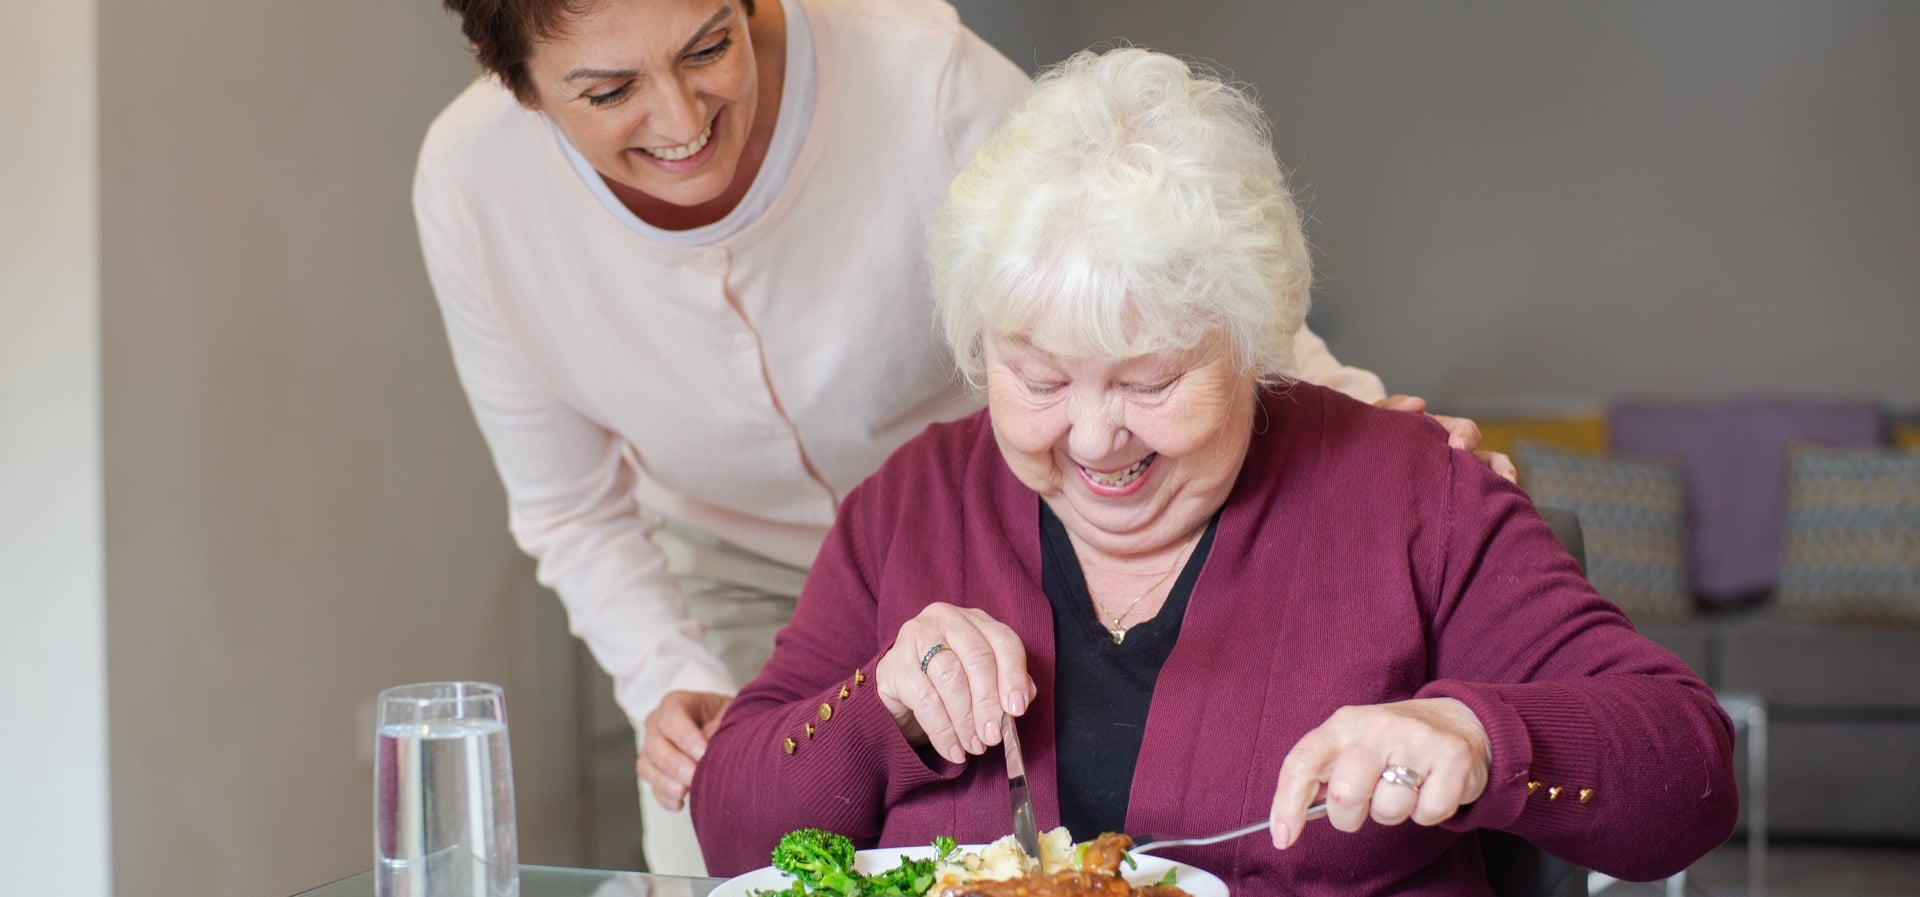 Elderly lady red cardigan eating using knife fork glass table female carer standing behind